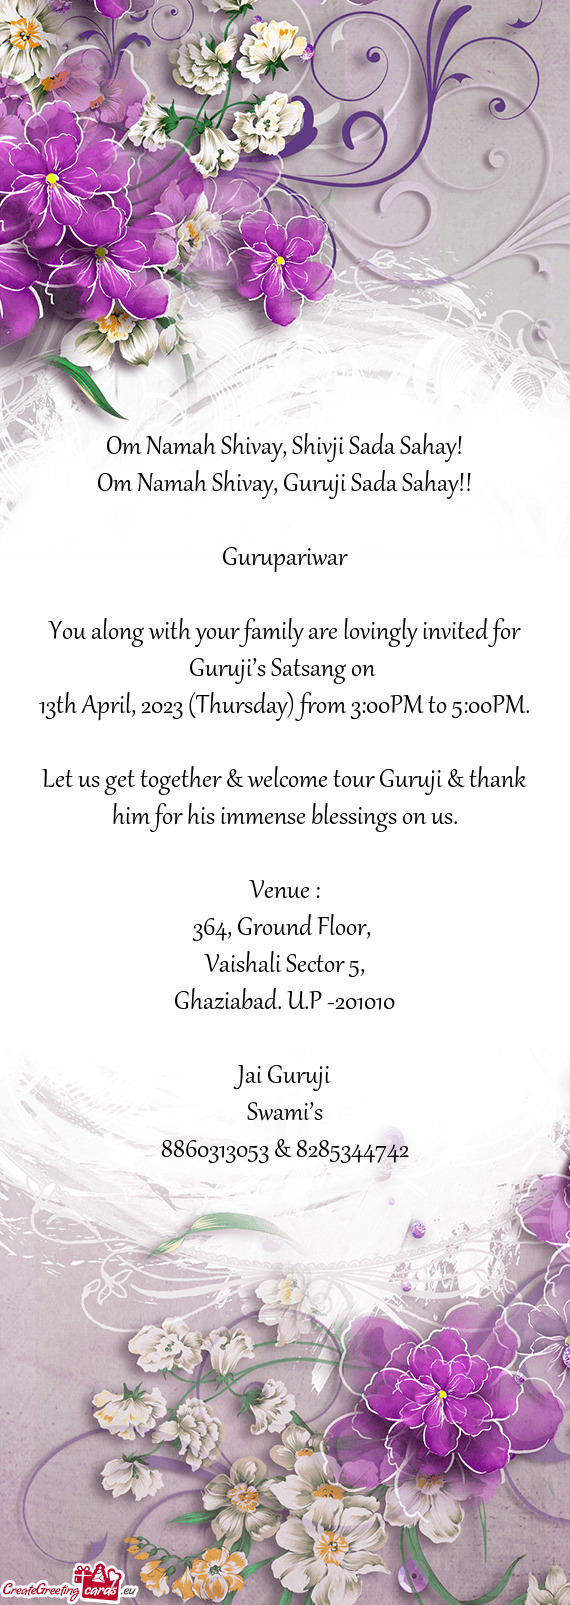 You along with your family are lovingly invited for Guruji’s Satsang on